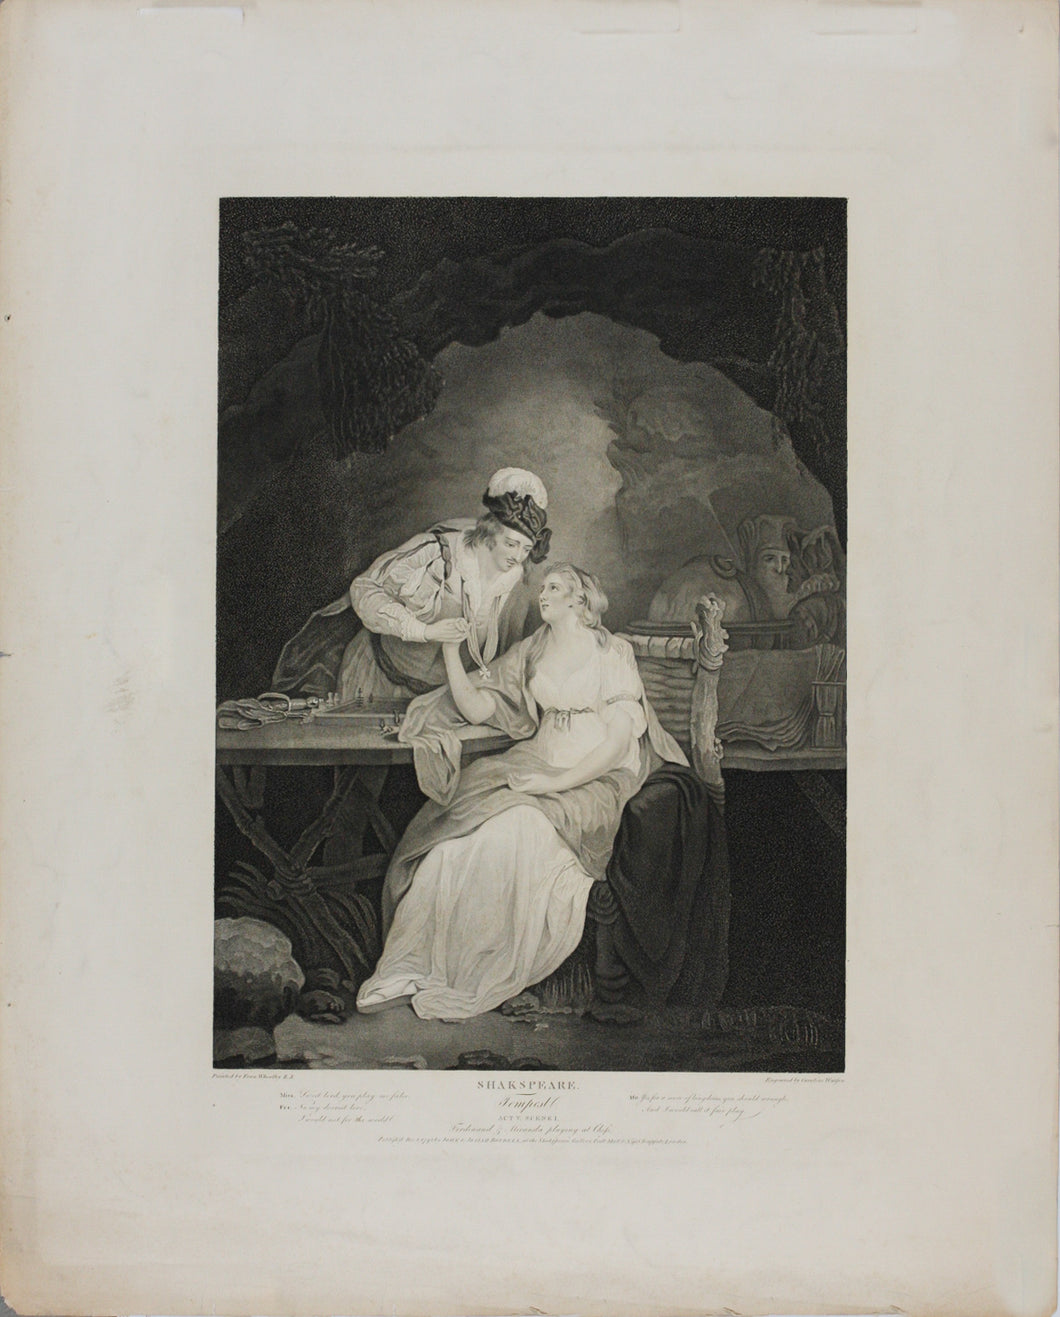 Francis Wheatley, after. Shakespeare. Tempest. Act V. Scene I. Engraved by Caroline Watson. 1795.